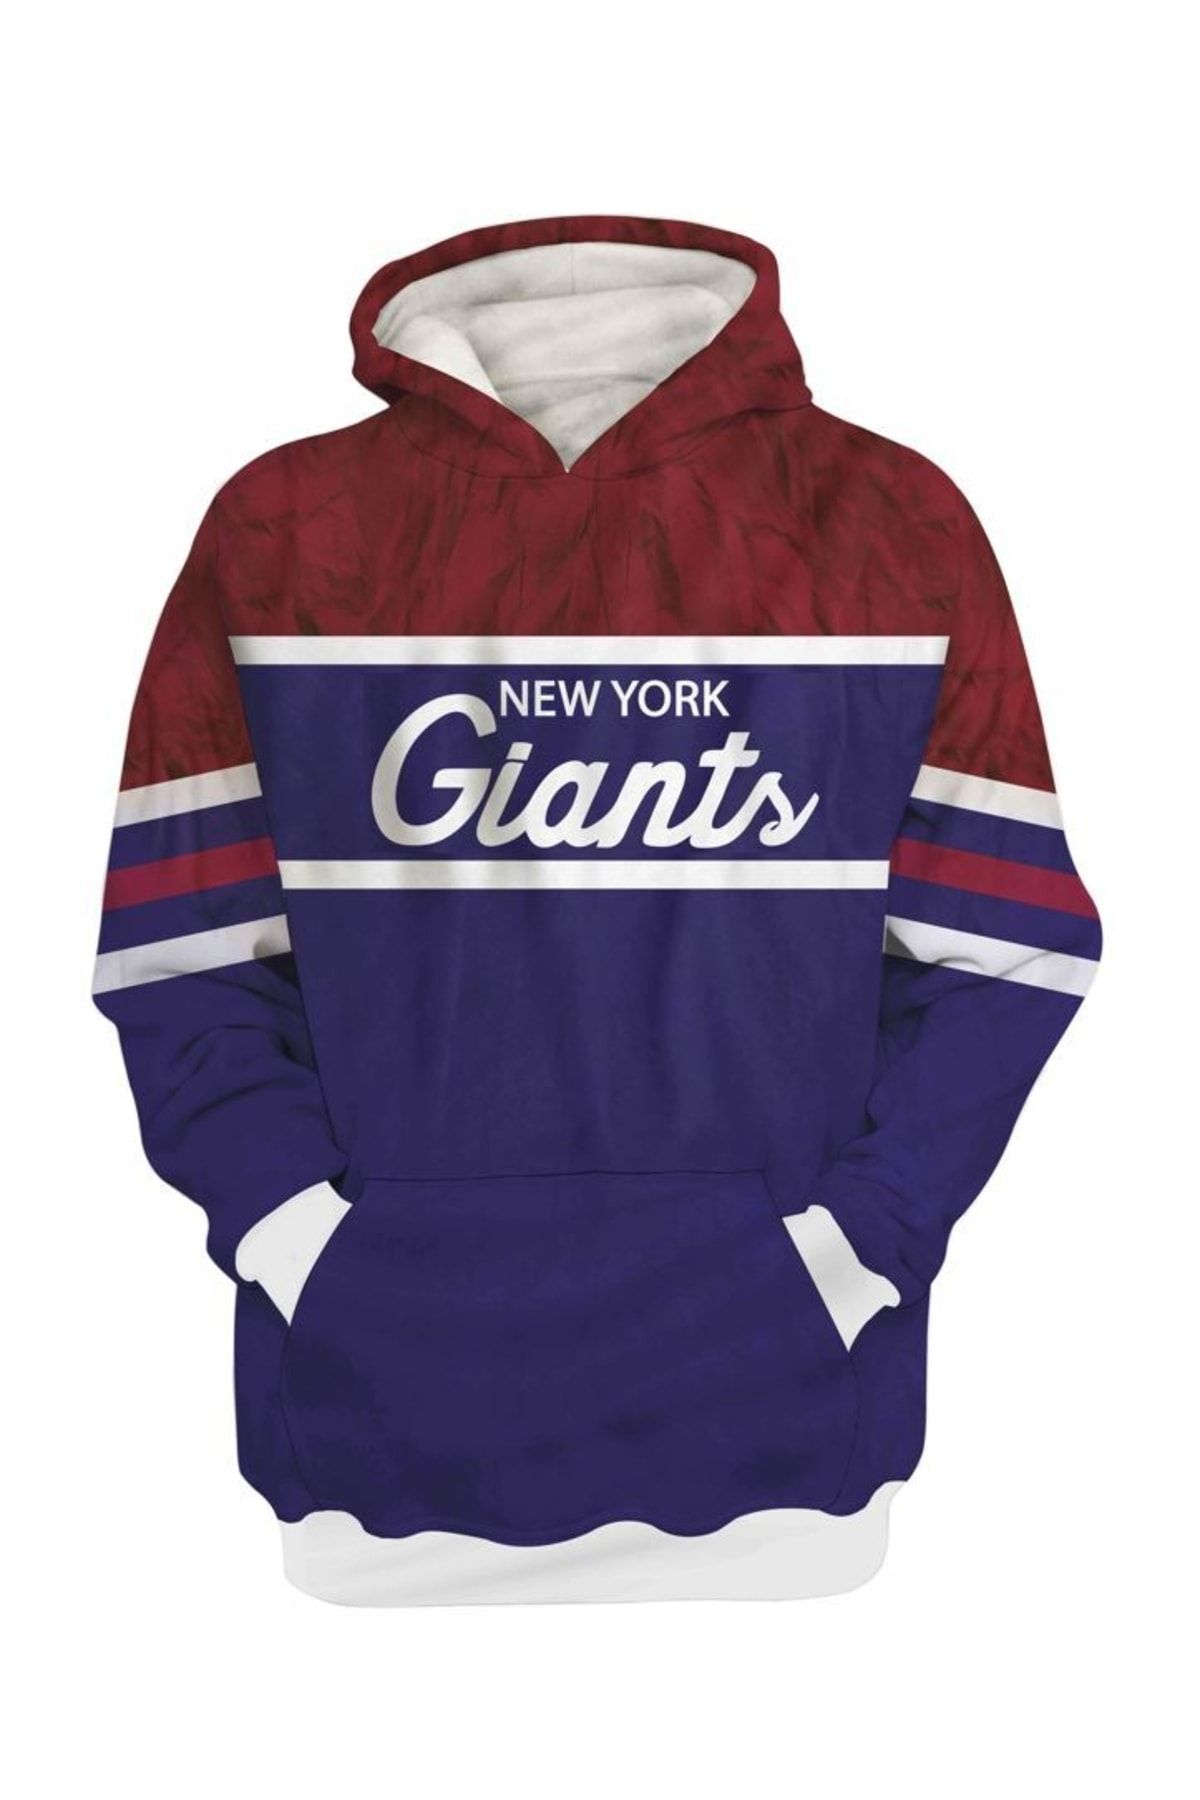 Usateamfans New York Giants 3d Oversize Hoodie